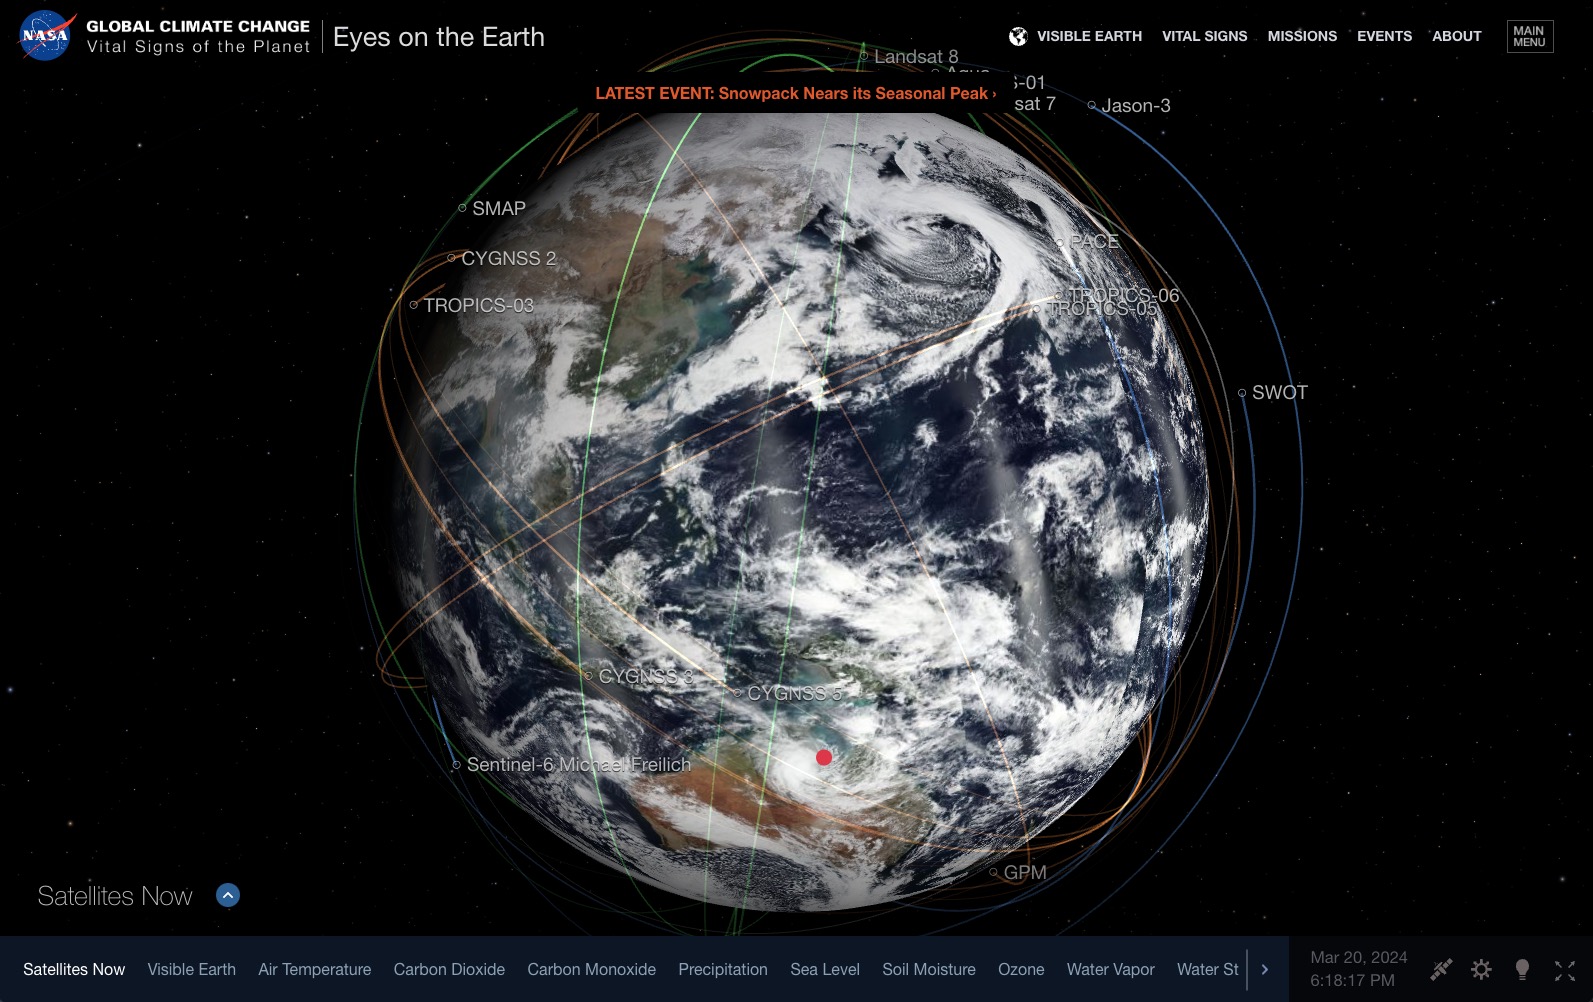 Numerous lines representing the paths of satellites circle and crisscross a simulated view of Earth with controls and toggles lining sides of the image.